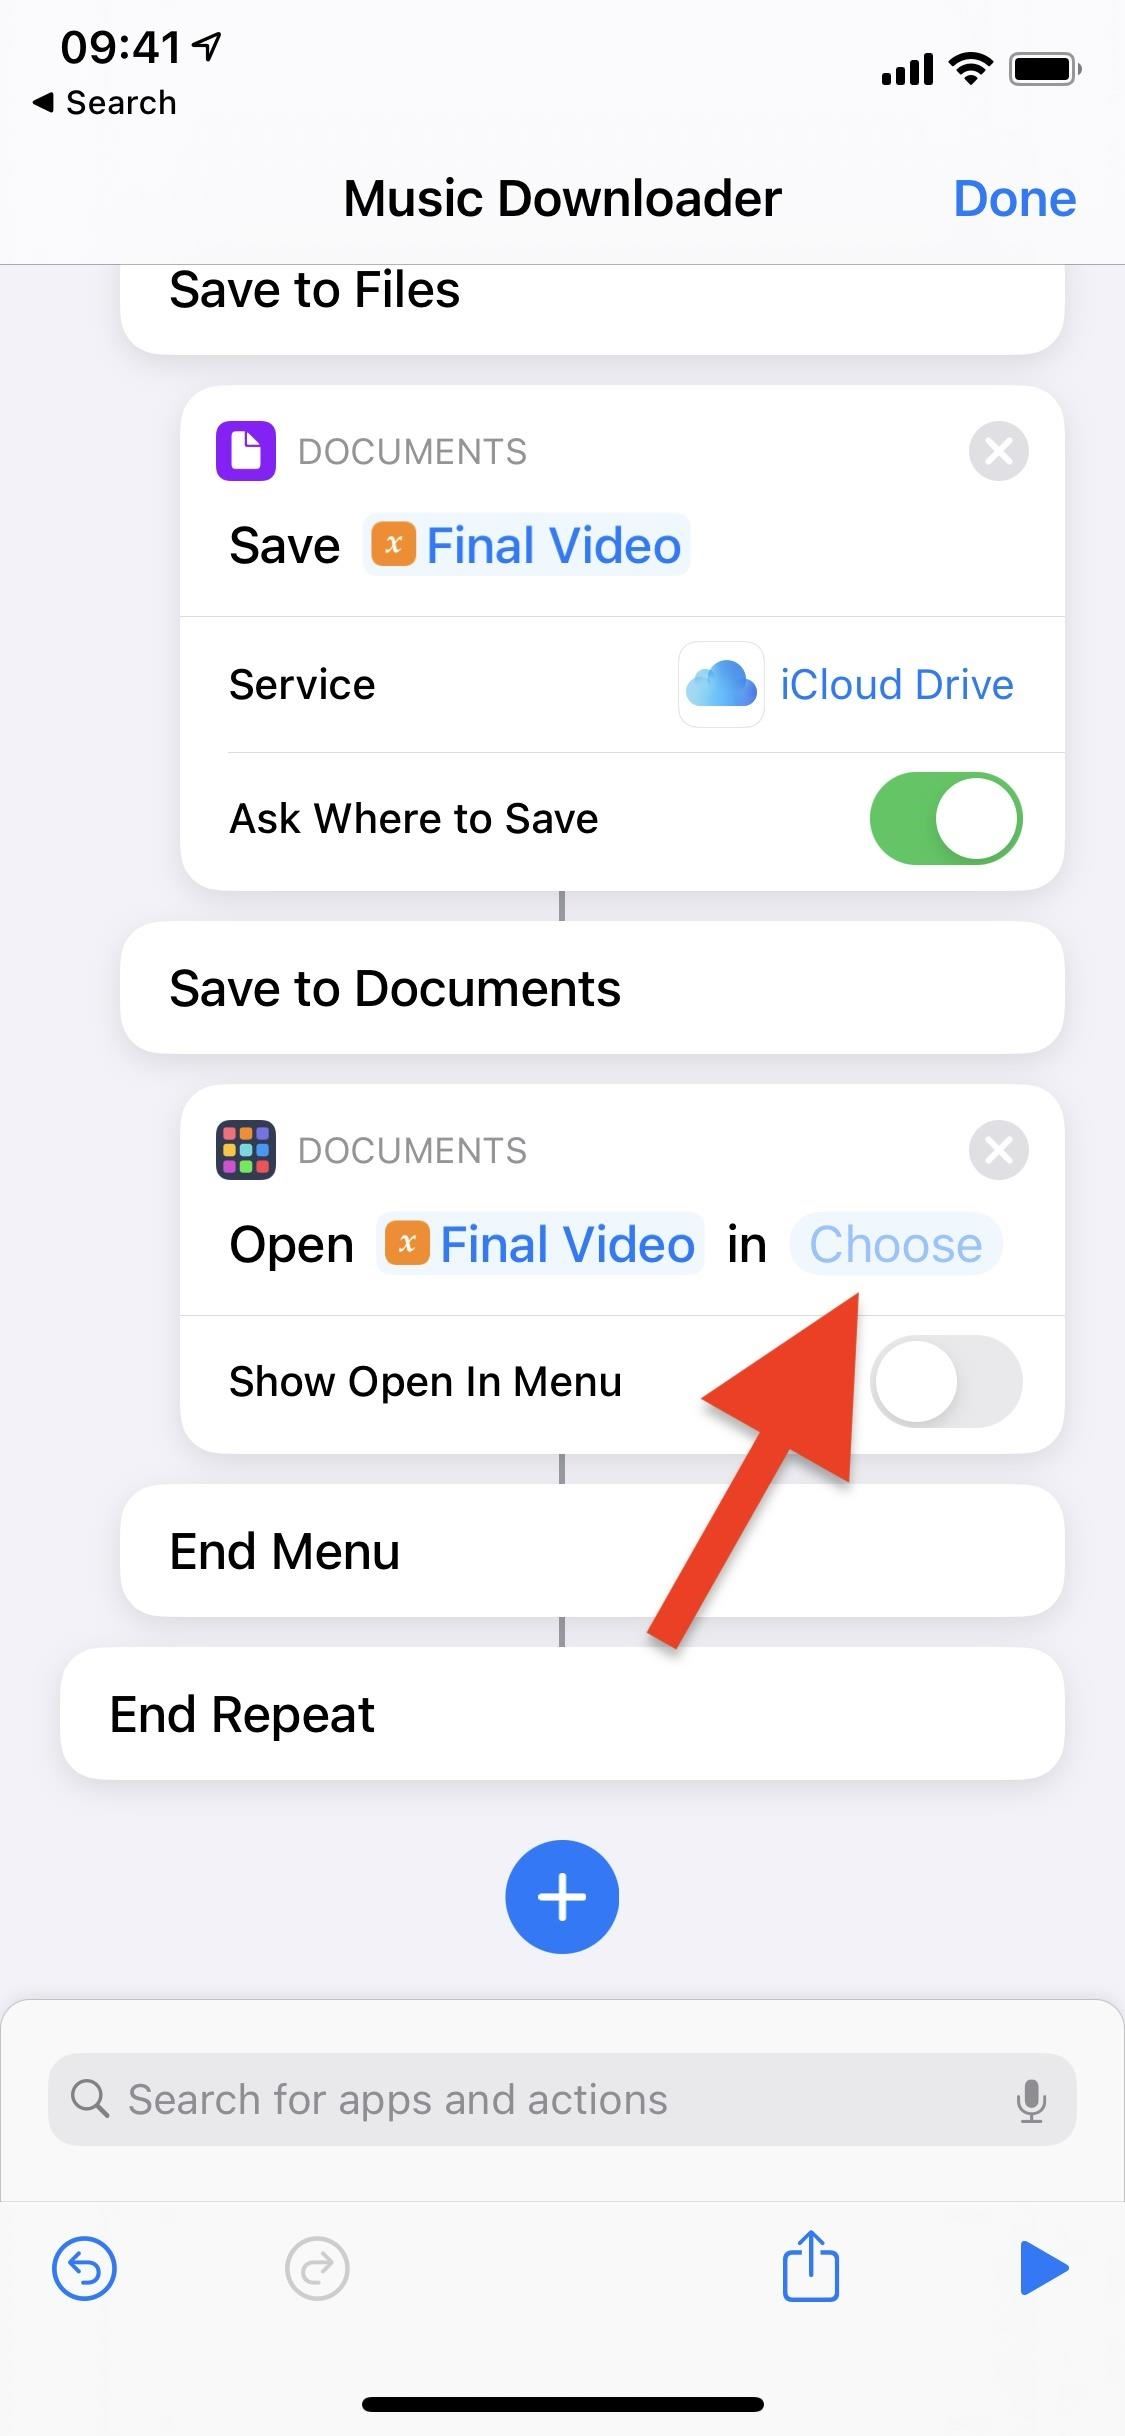 This iOS Shortcut Finds and Downloads Free Songs for You to Listen Offline to Your iPhone